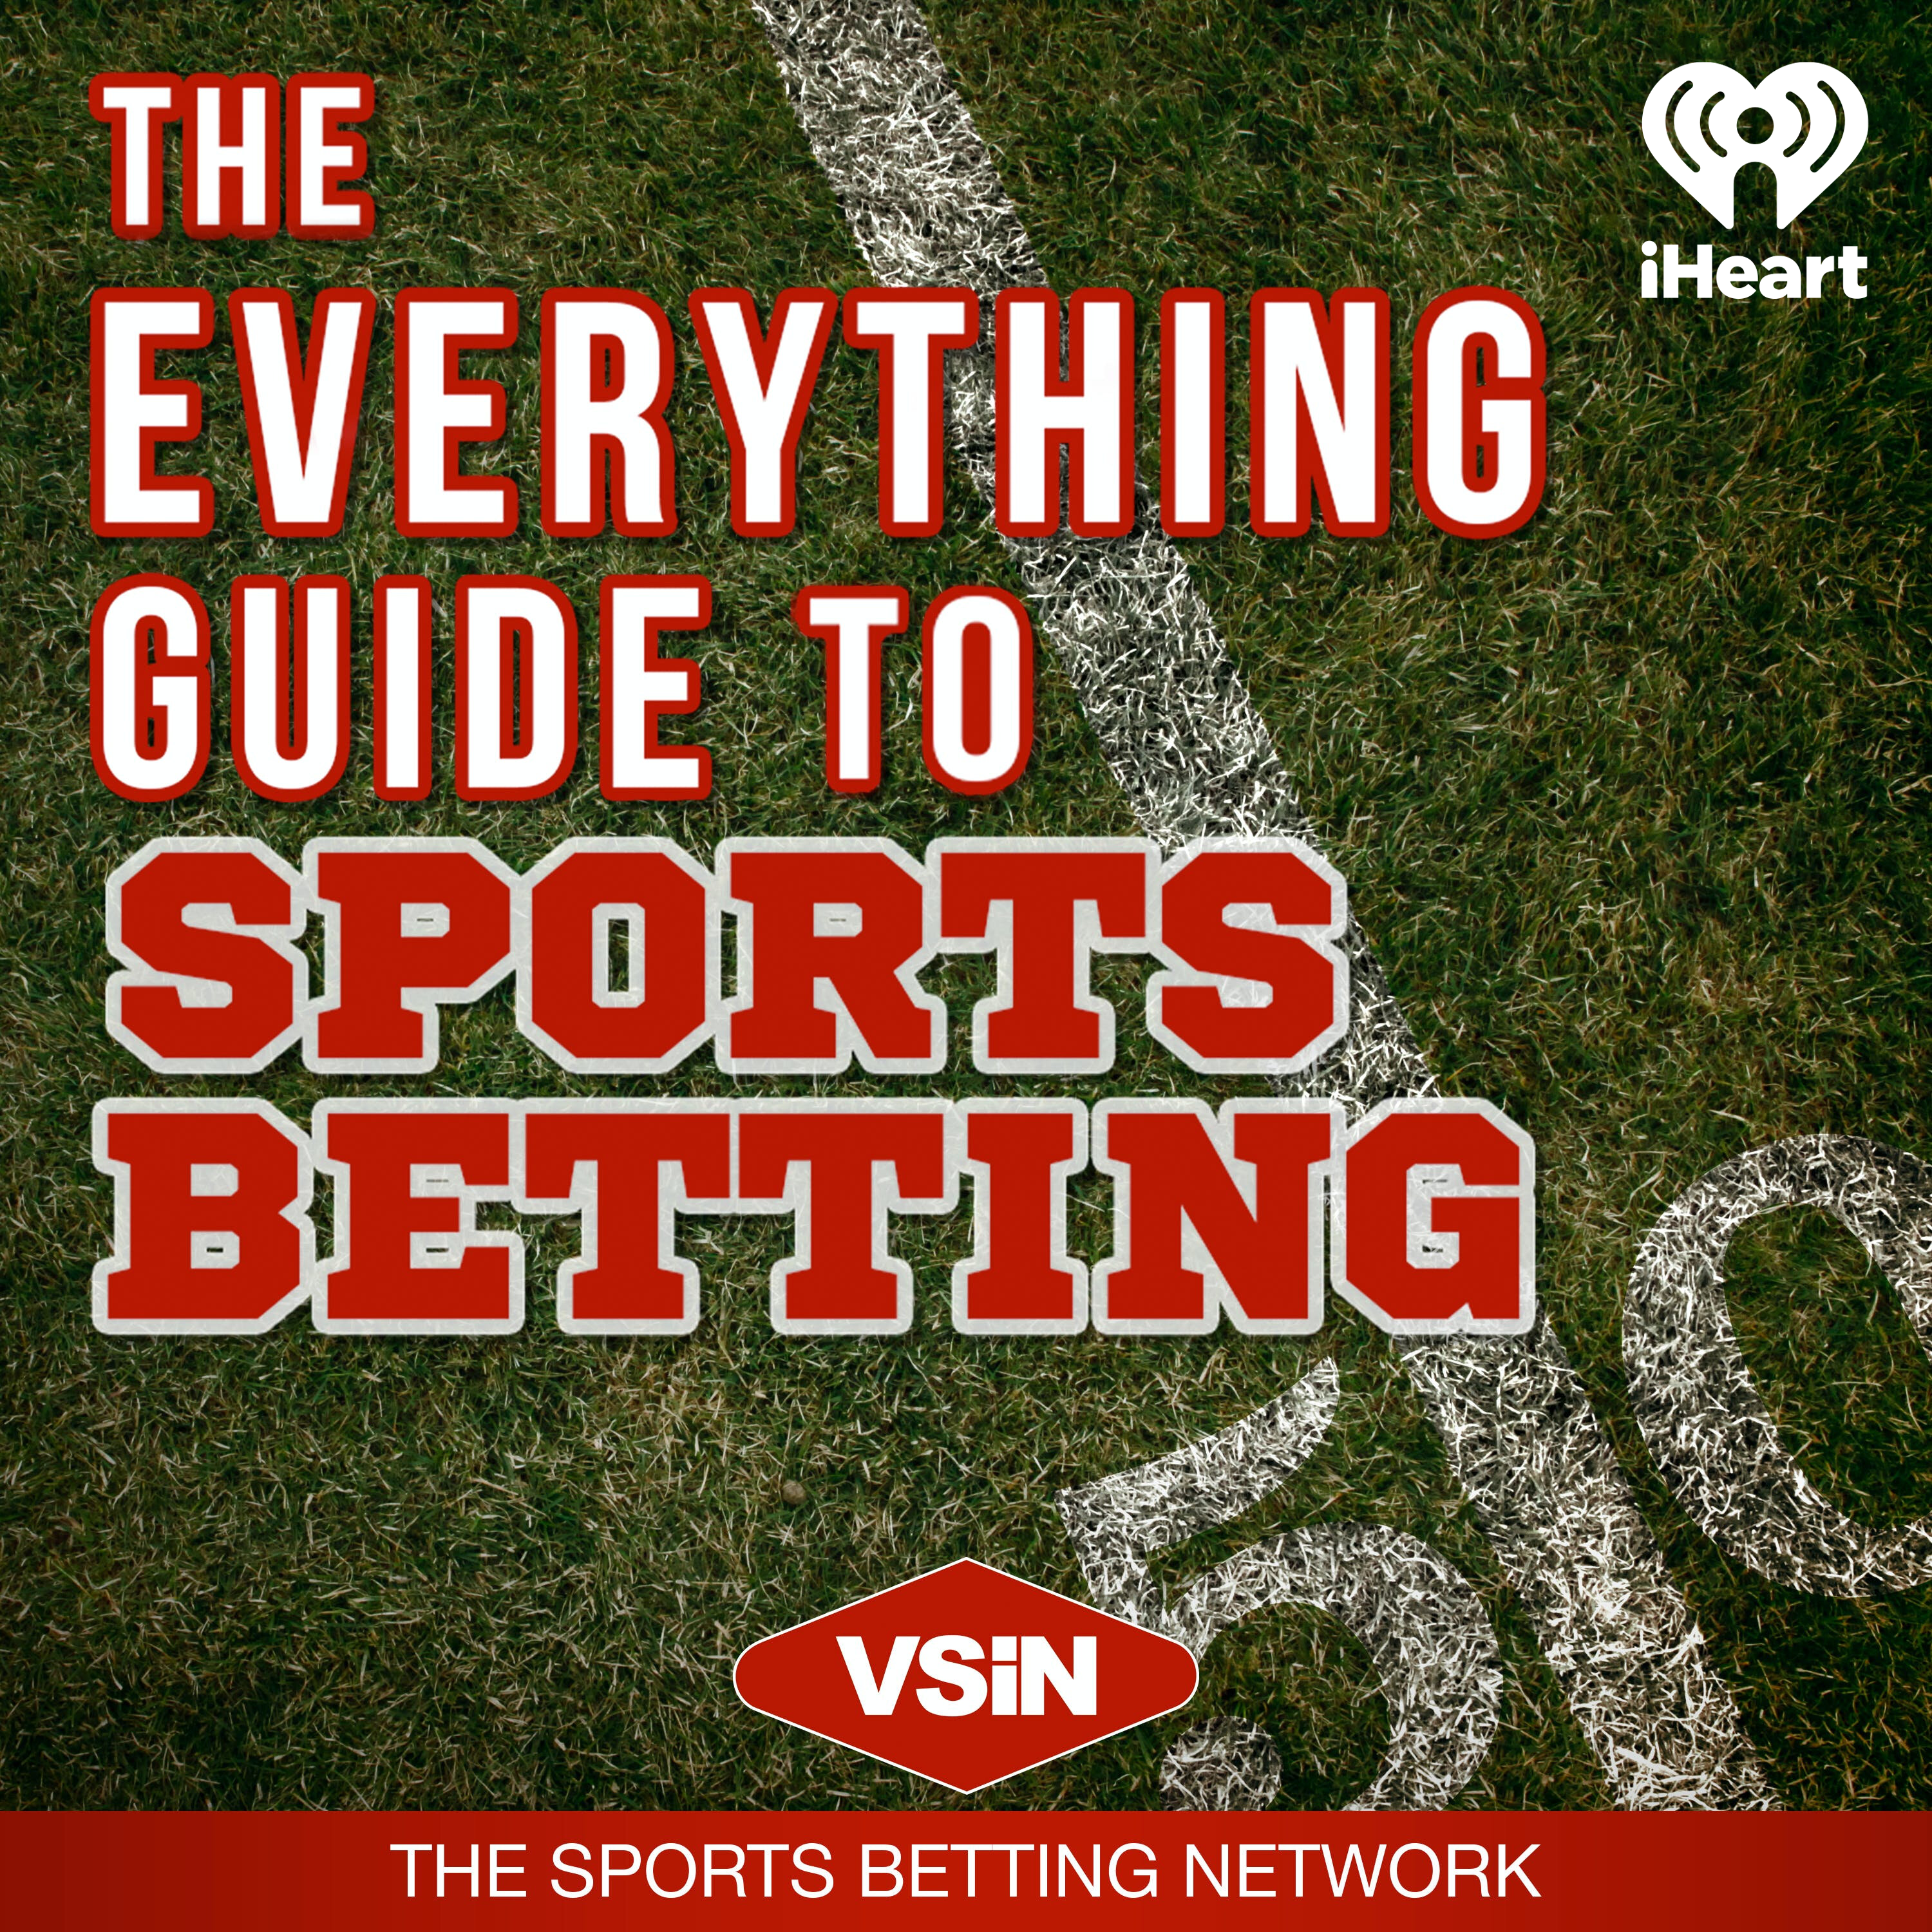 Everything Guide to Sports Betting | February 10, 2021